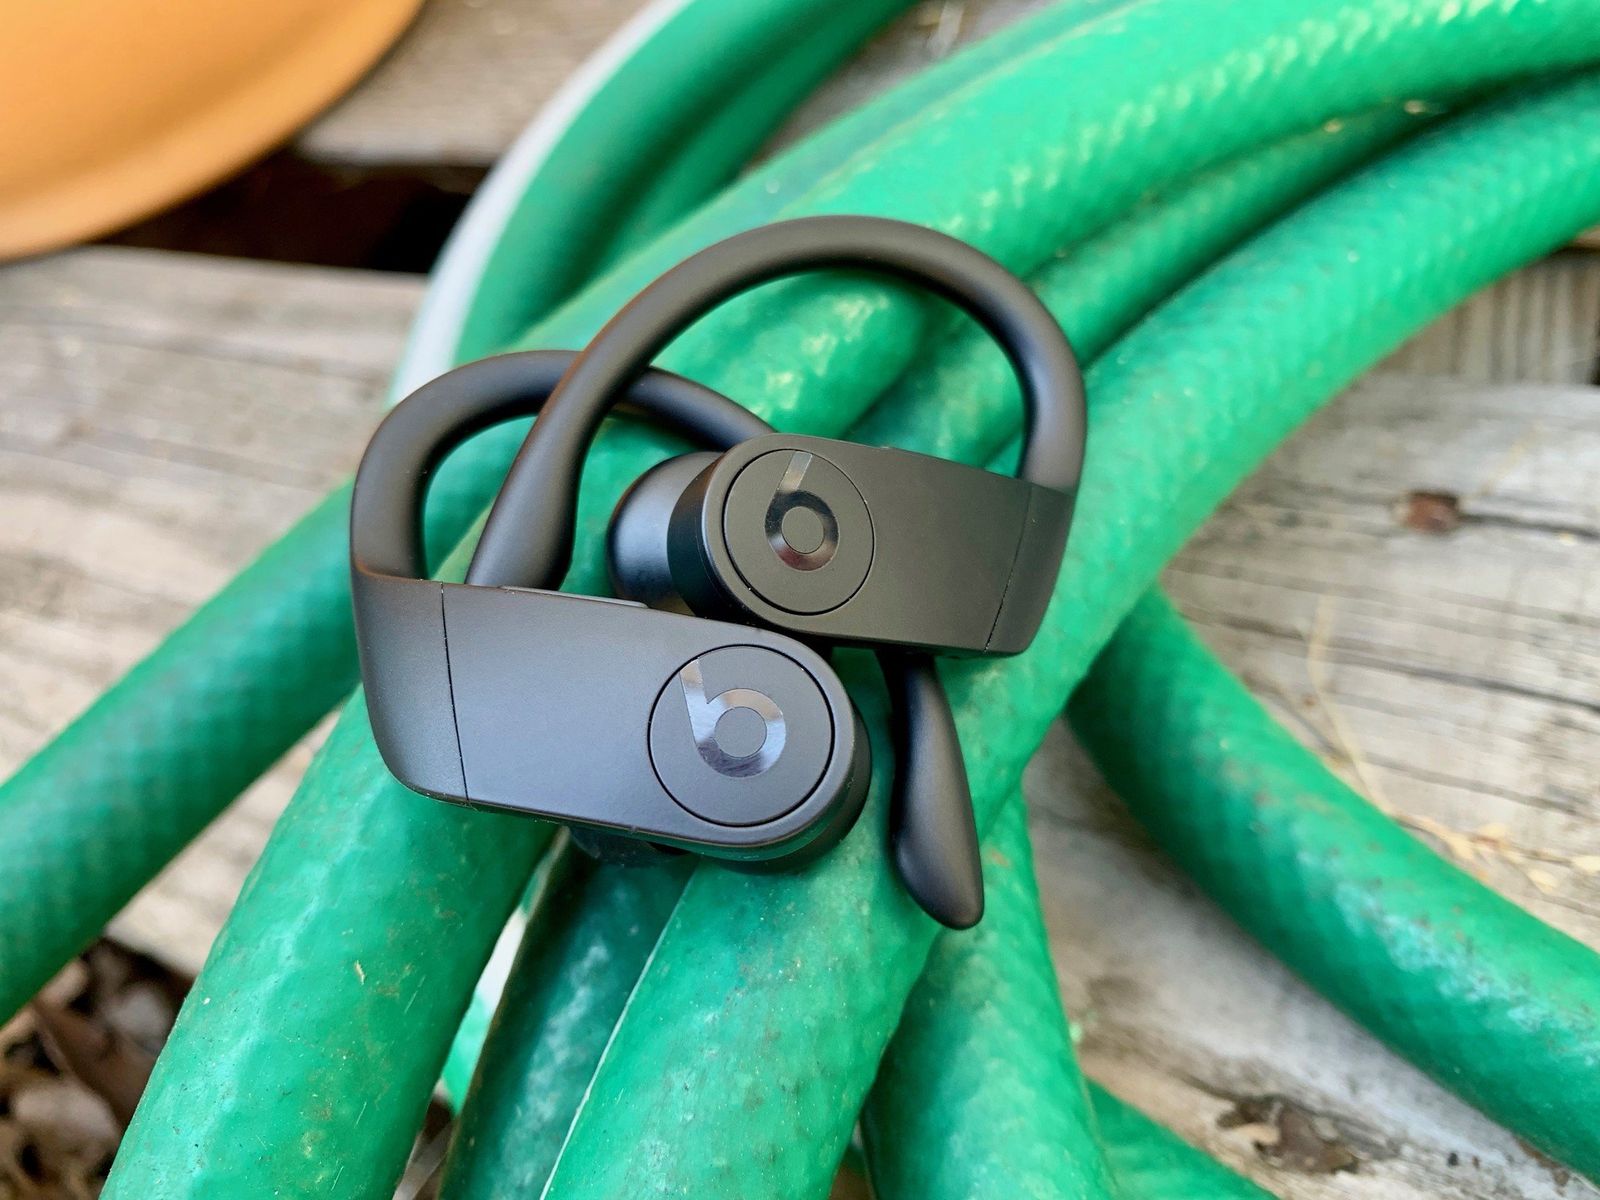 How to control playback on the PowerBeats Pro